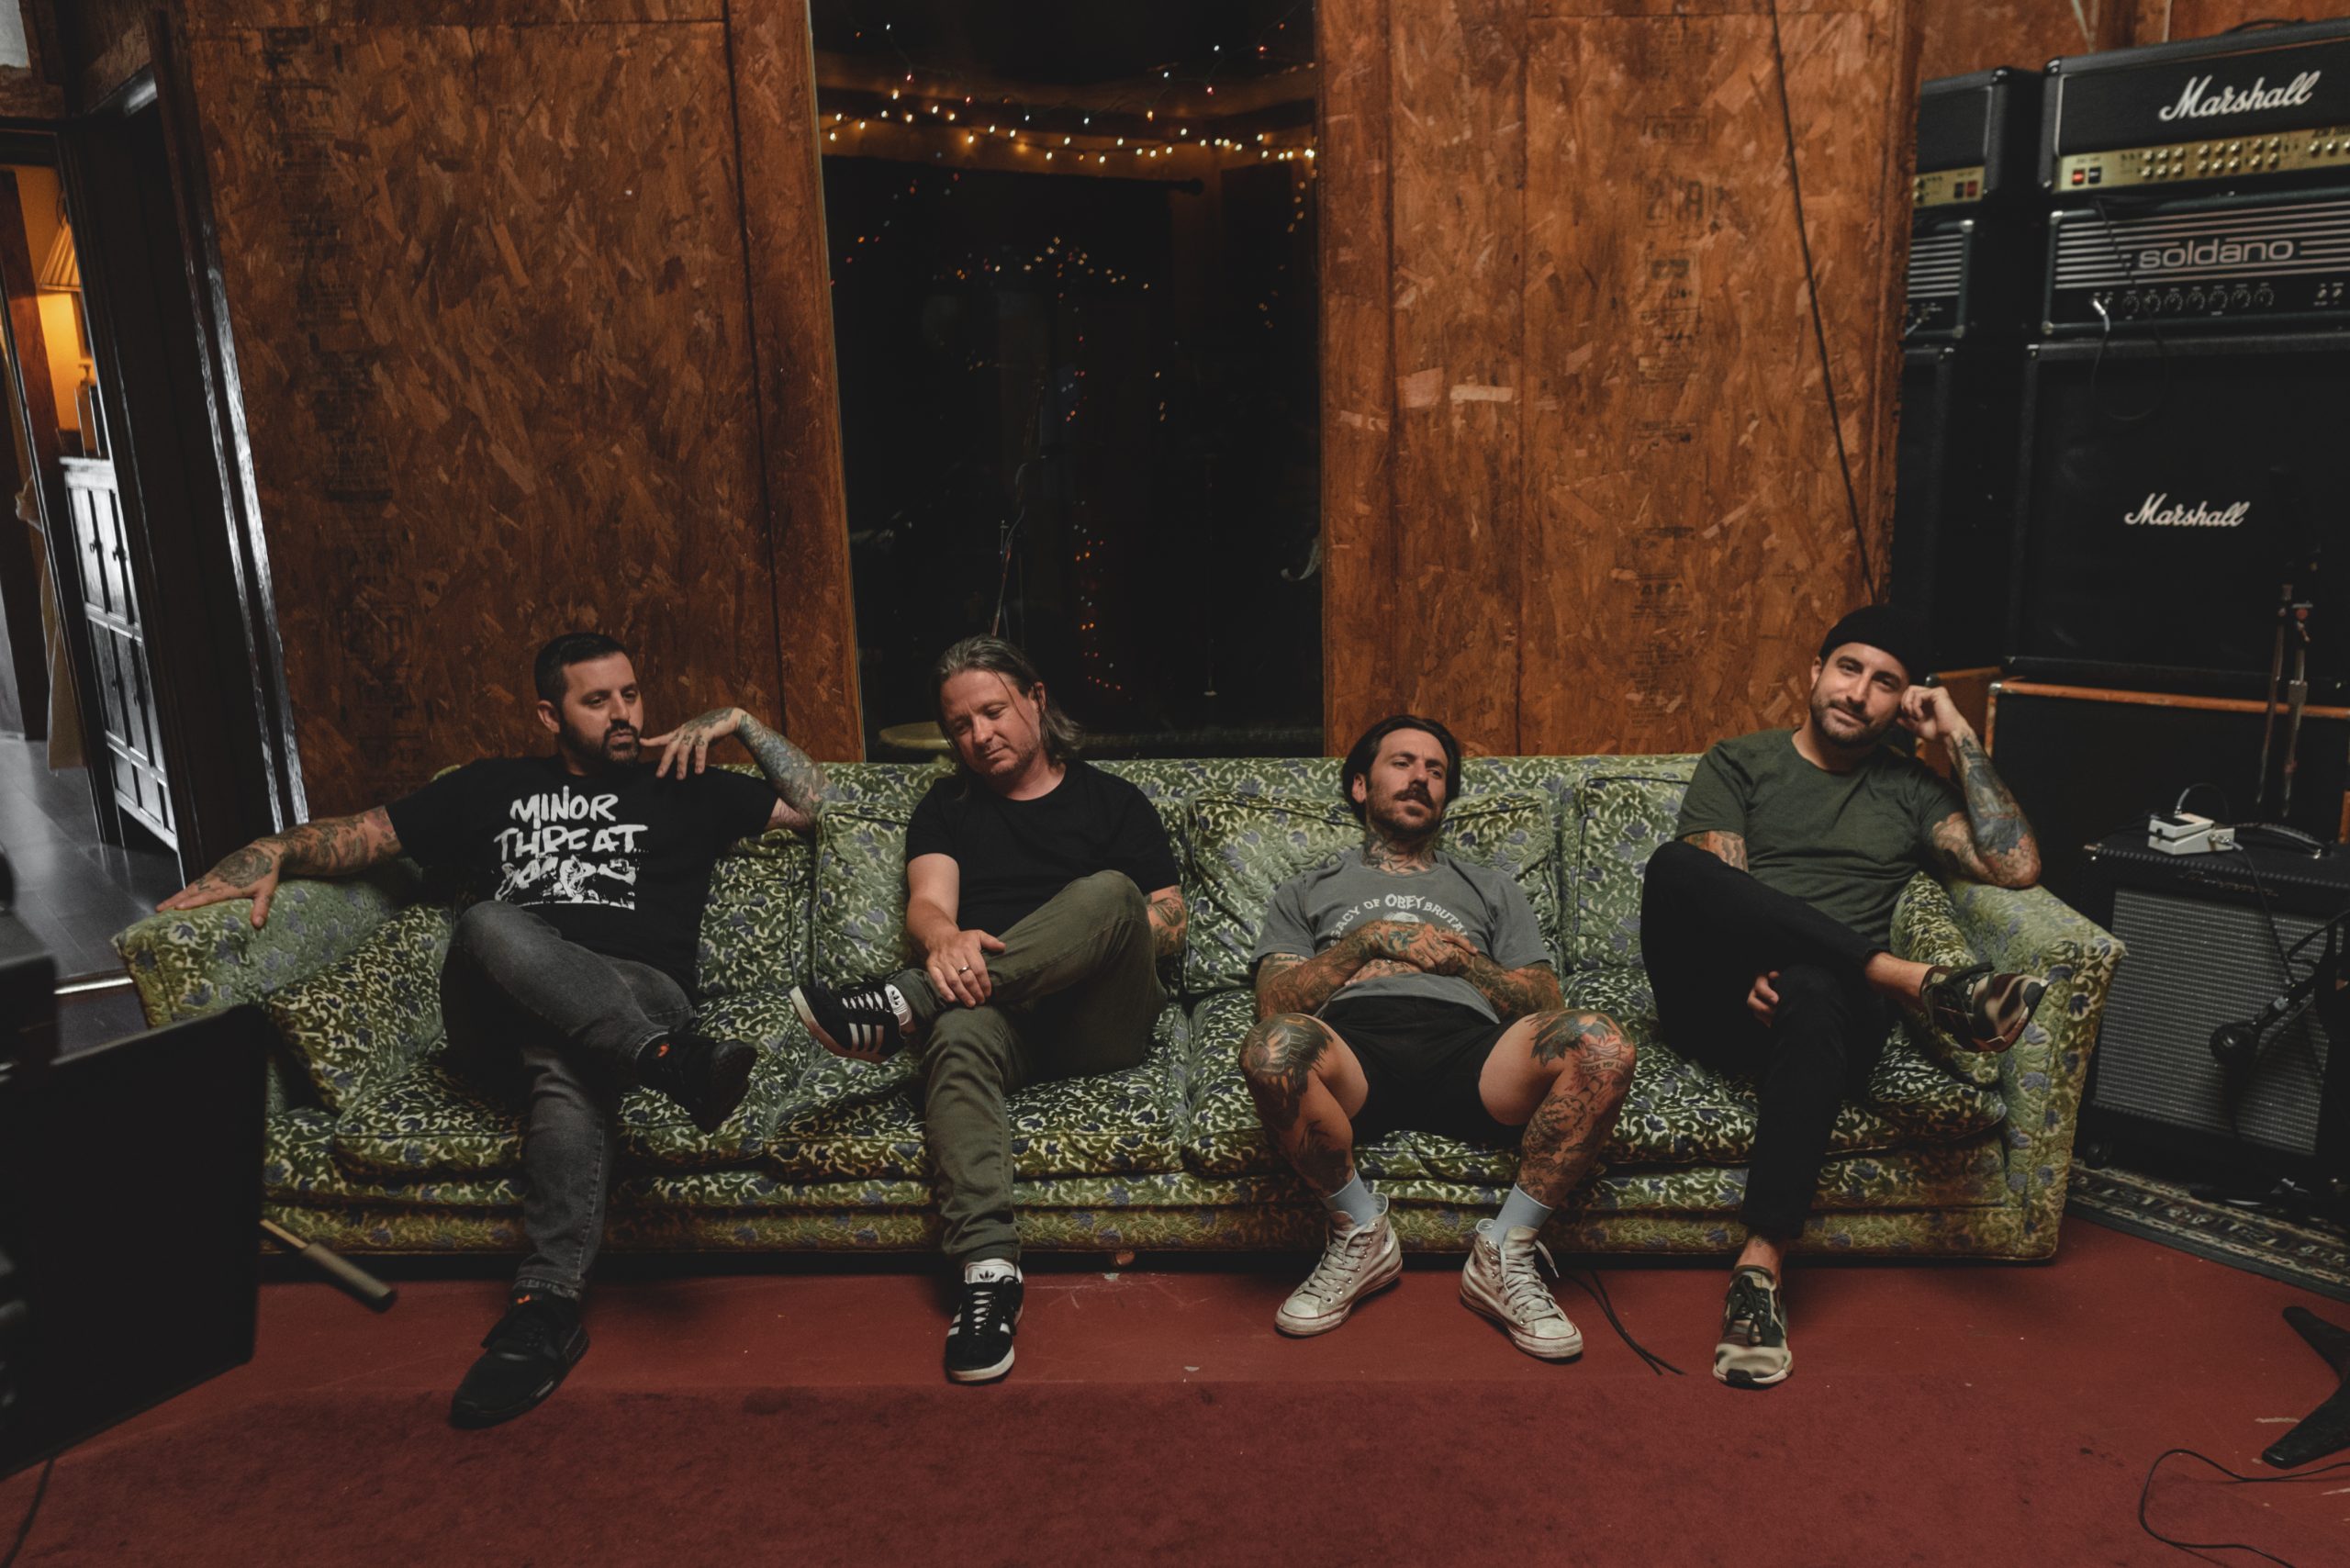 Bayside announce new EP “Acoustic Volume 3”; release video for “Light Me Up”